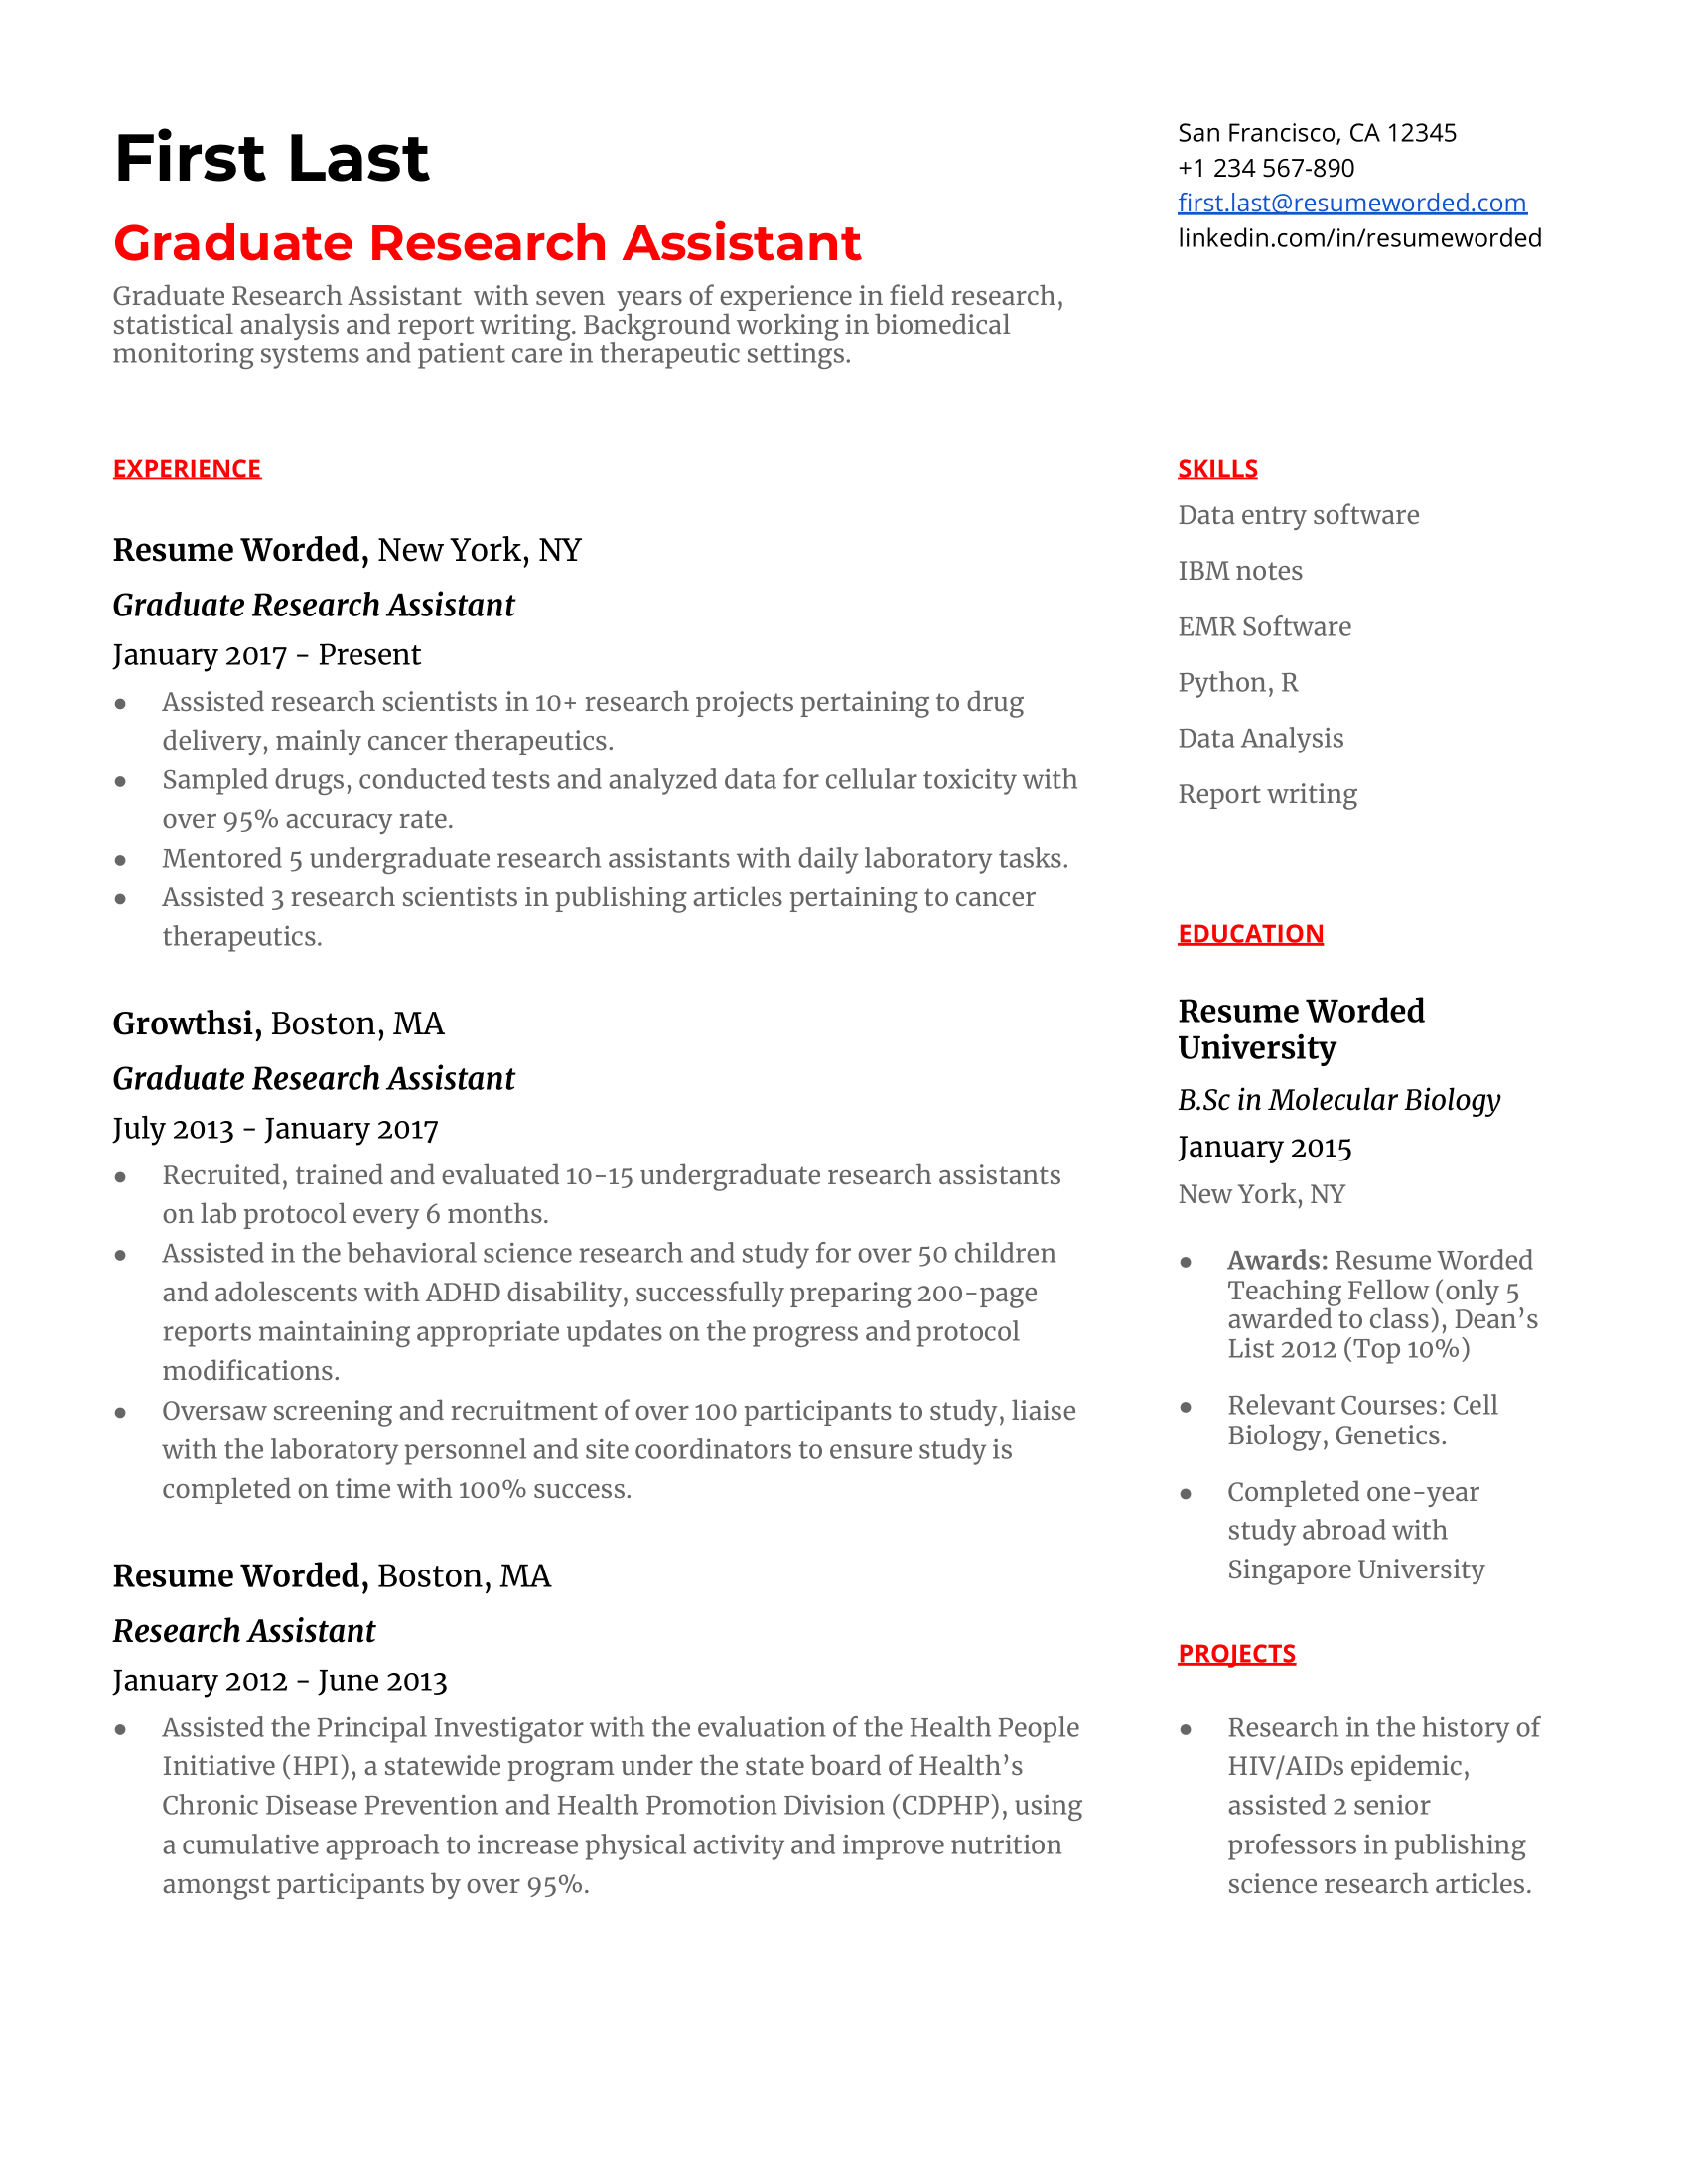 A resume for a graduate research assistant with a degree in biology and experience as a research assistant.